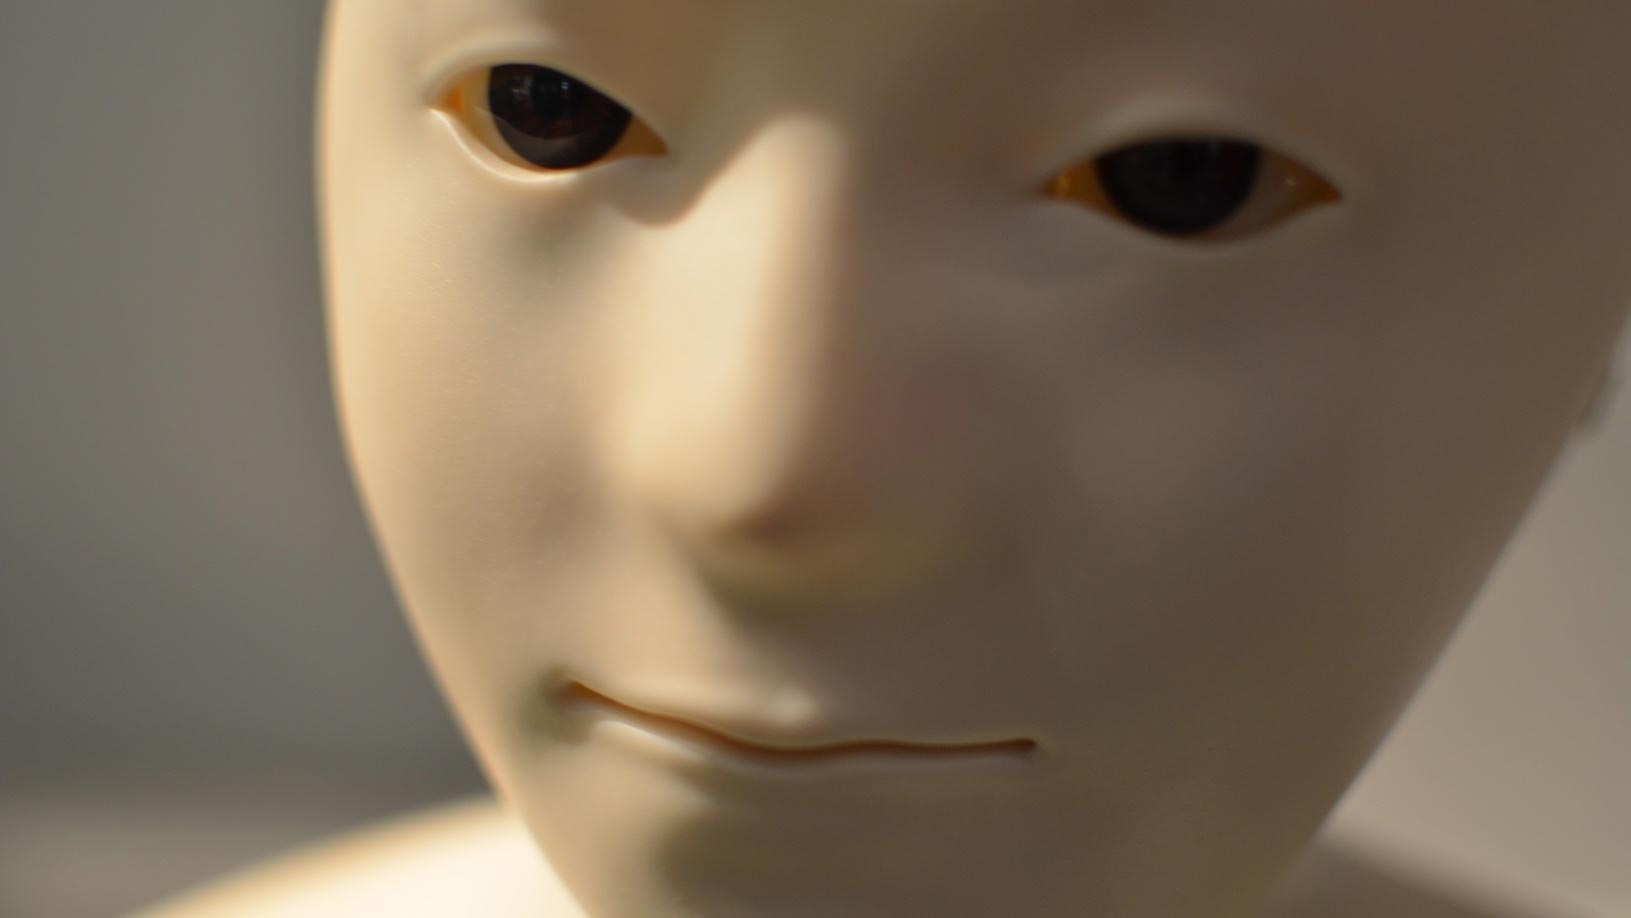 white-clothing-toy-close-up-mannequin-face-web